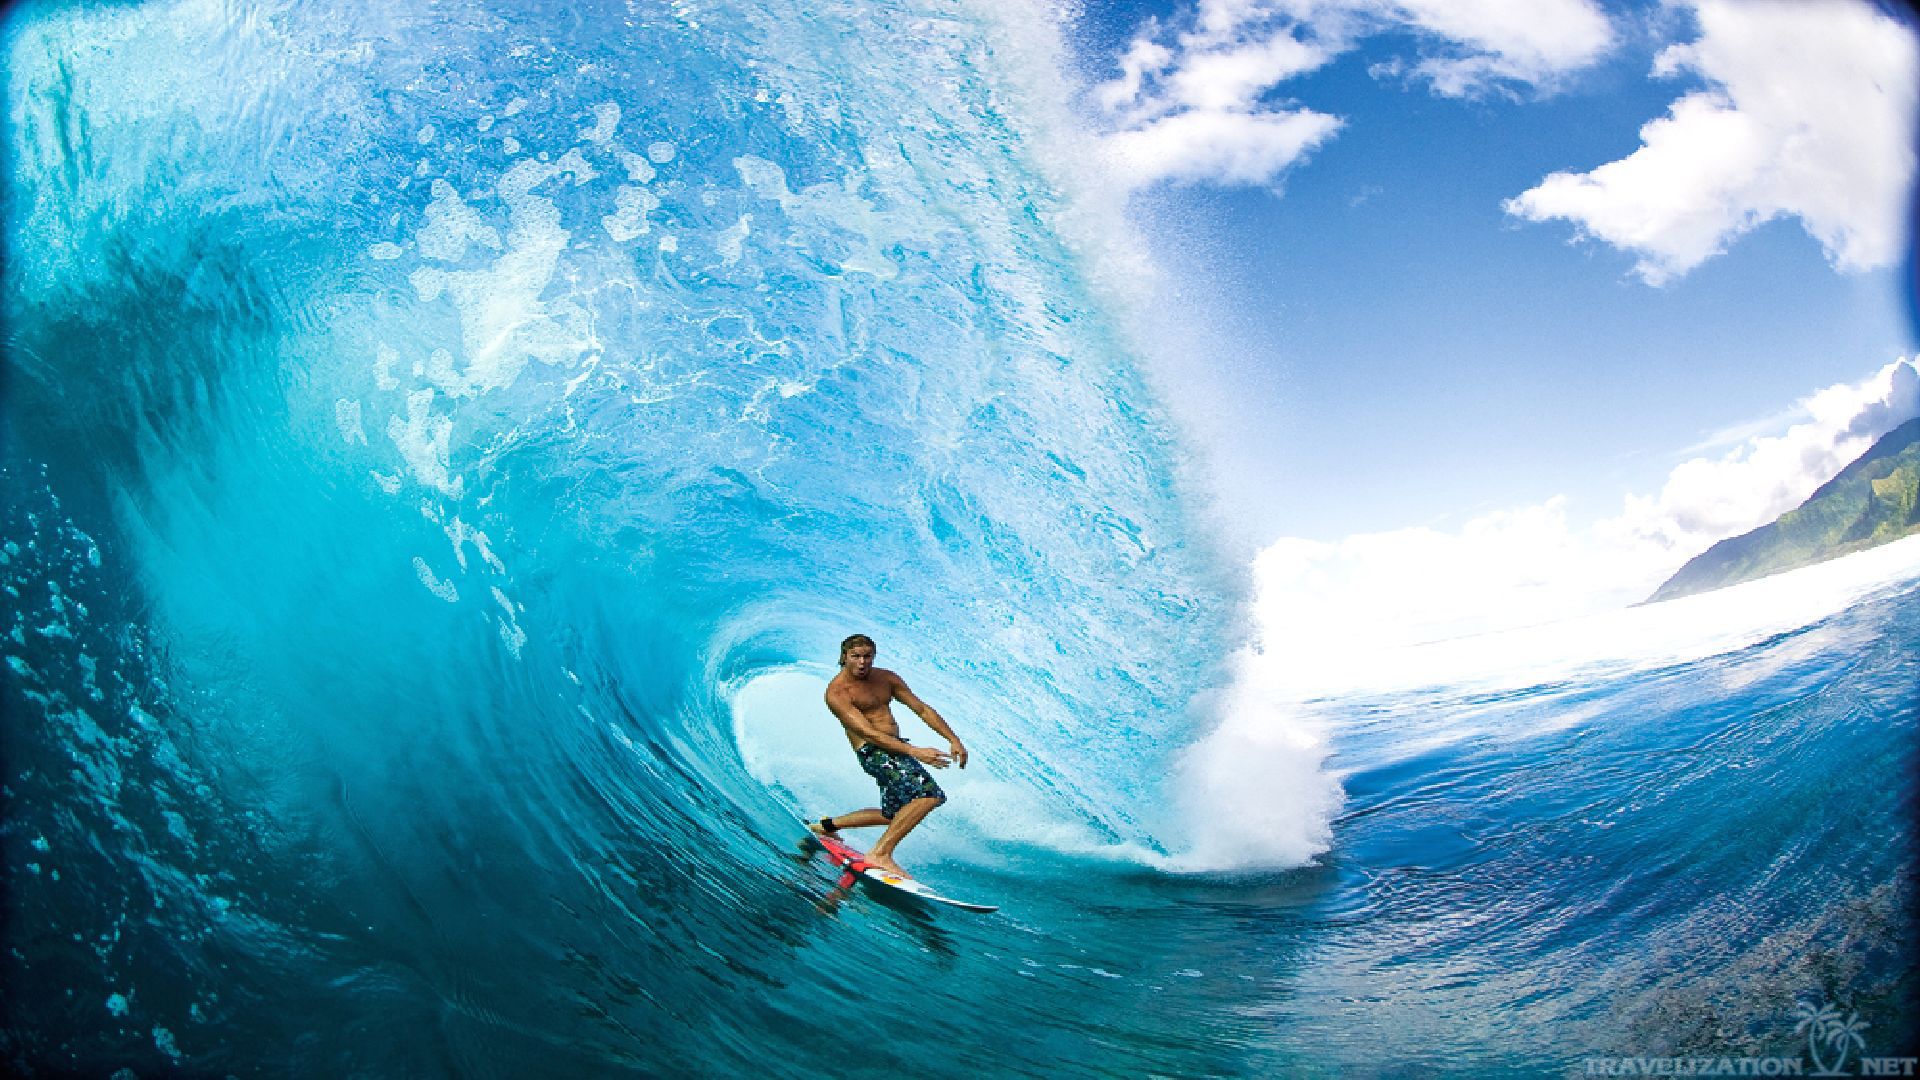 Cool And Refreshing Surfing Wallpaper Travelization